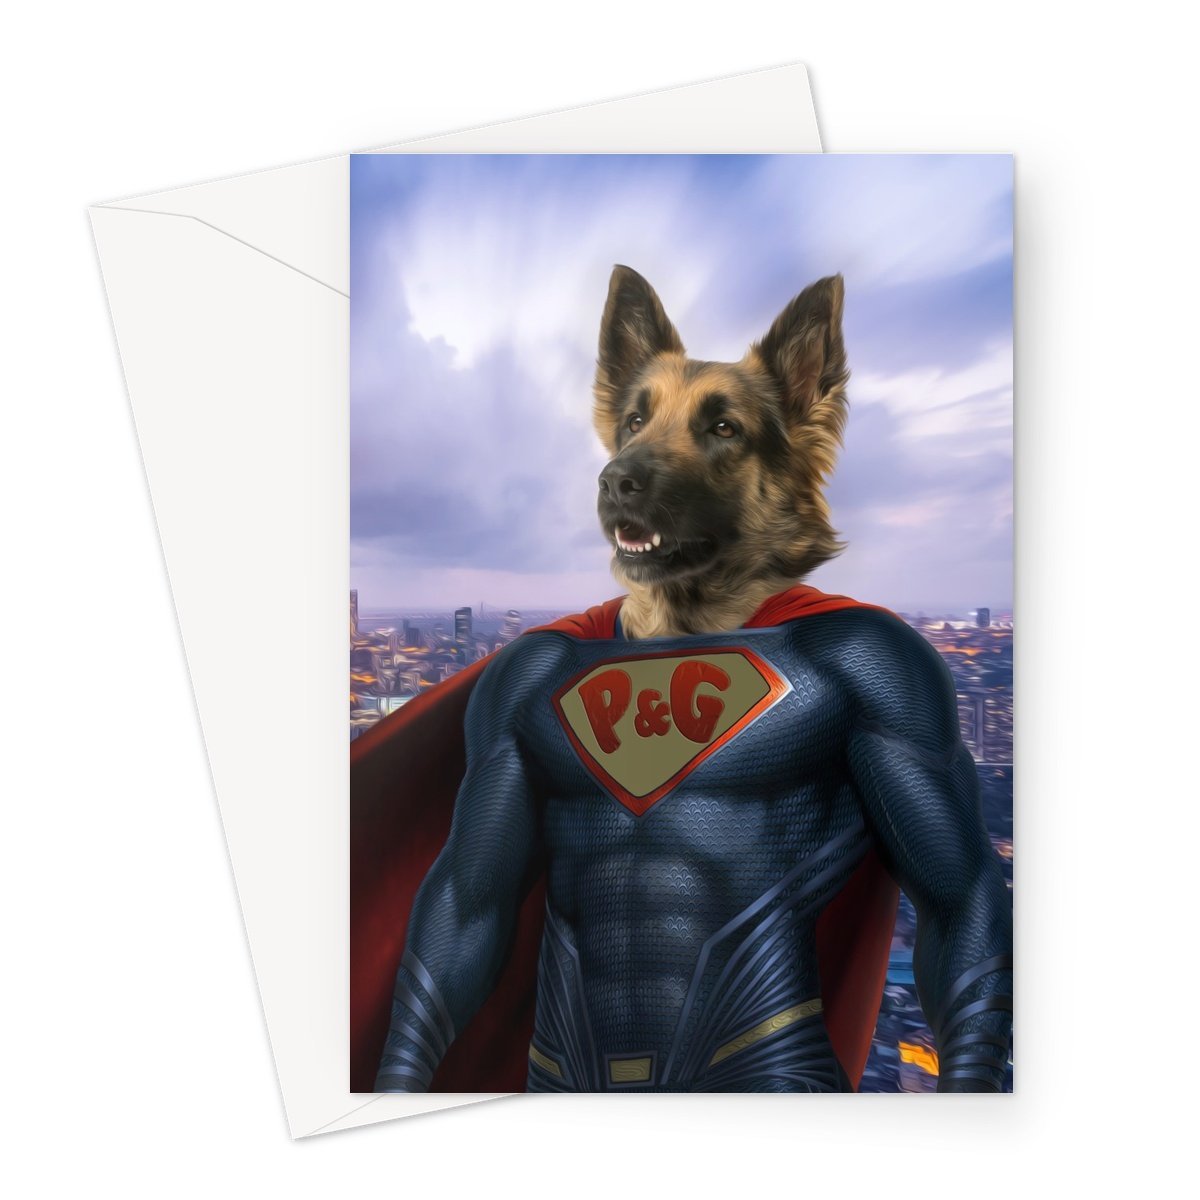 Super Pet: Custom Pet Greeting Card - Paw & Glory - paw and glory, personalized pet and owner canvas, custom pet portraits south africa, small dog portrait, the admiral dog portrait, dog portrait images, dog portraits colorful, pet portraits